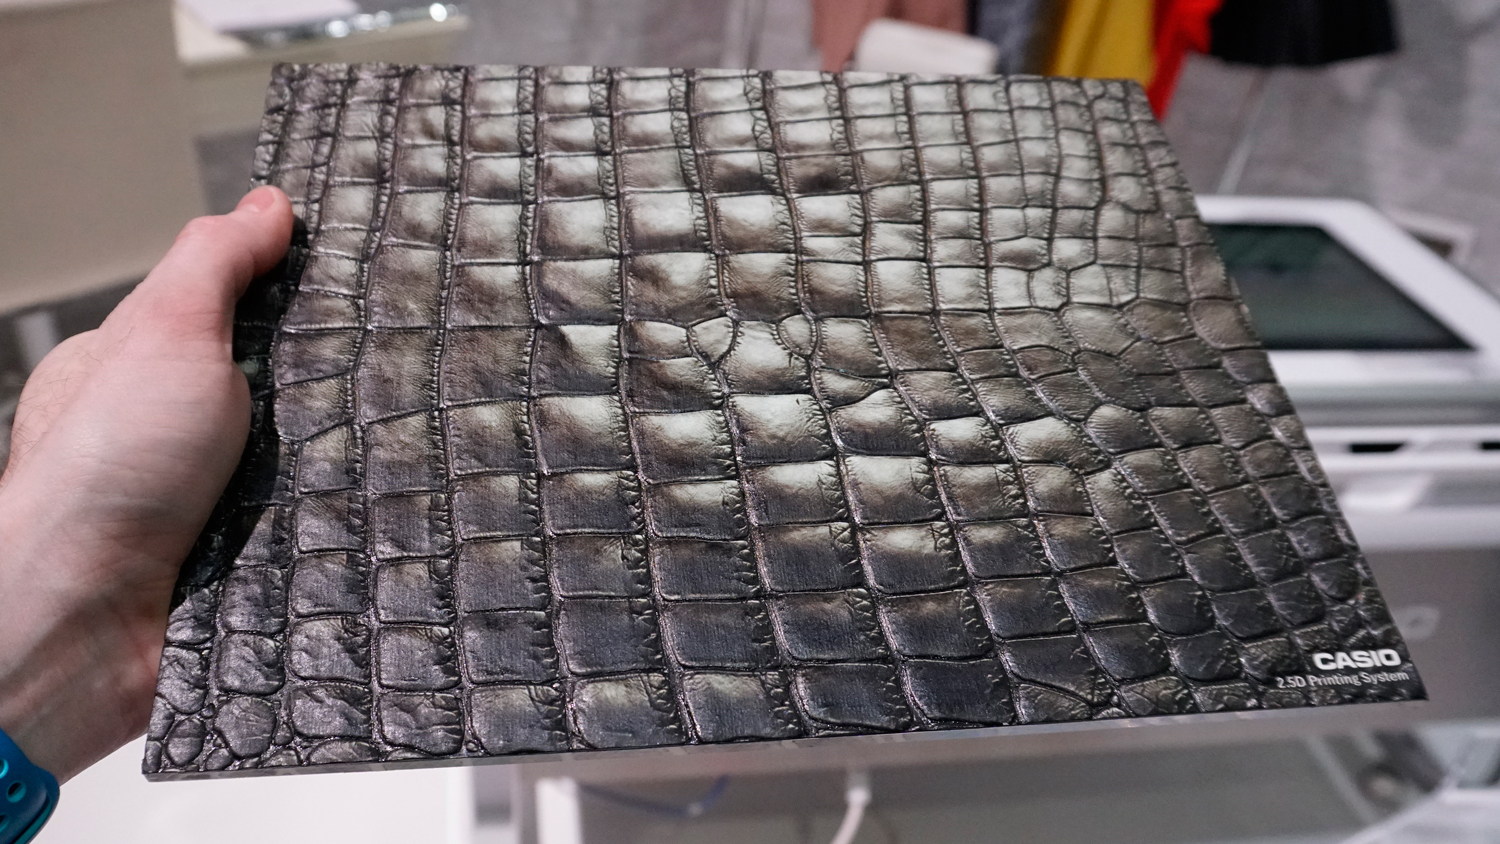 Casio’s $64,000 Printer Can Turn Paper Into Faux Leather, Wood And Alligator Skin